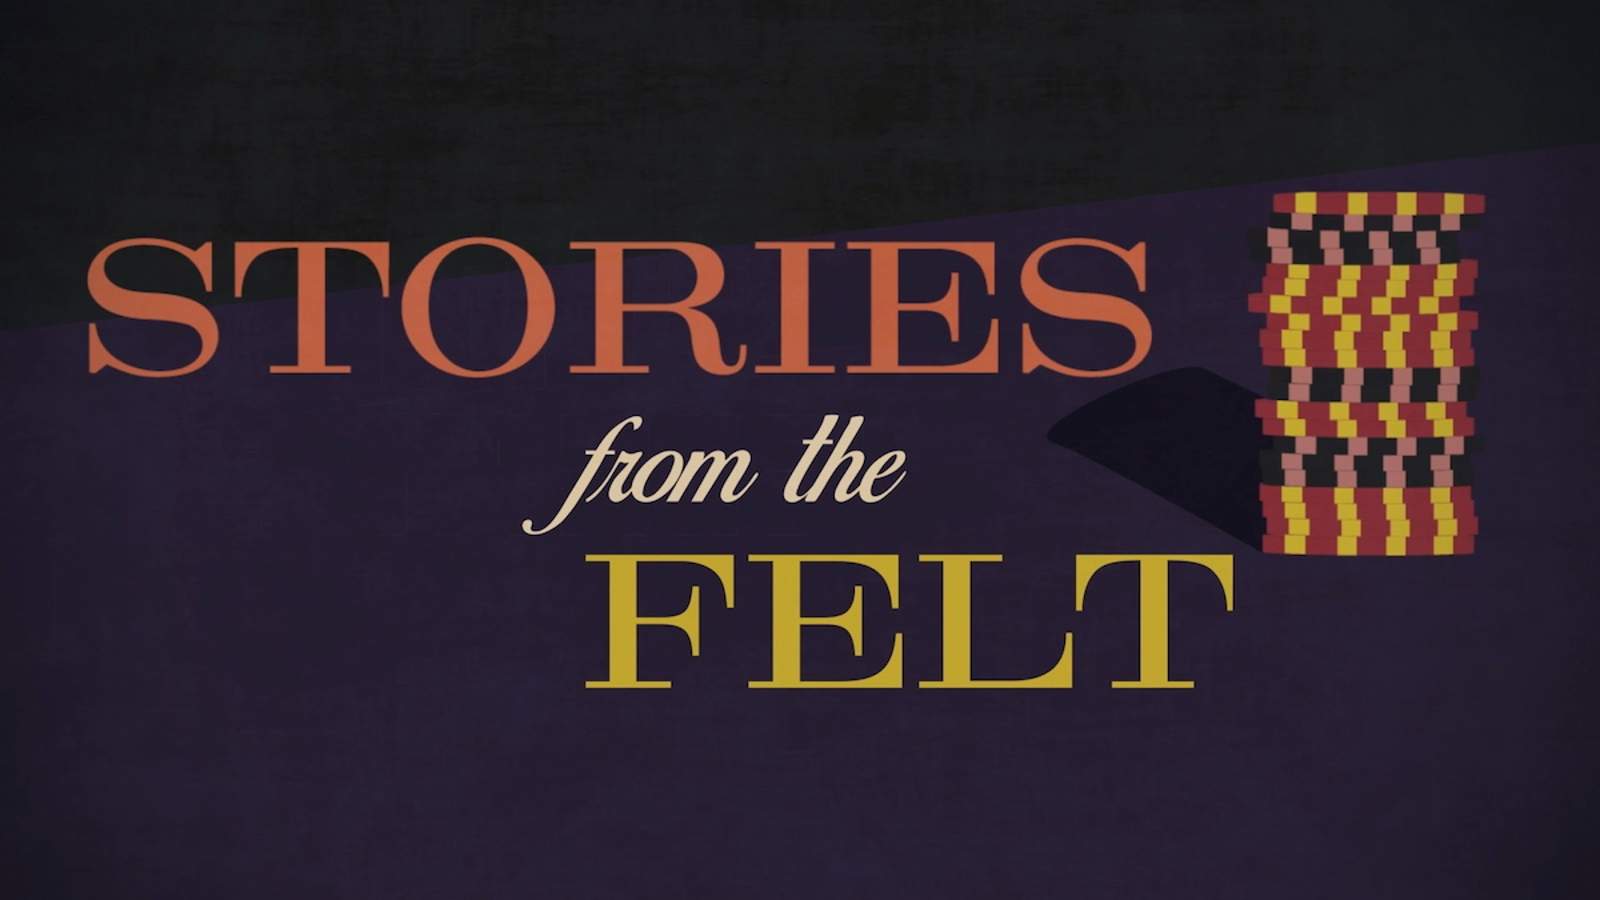 "Stories from the Felt" Debuts on PokerGO